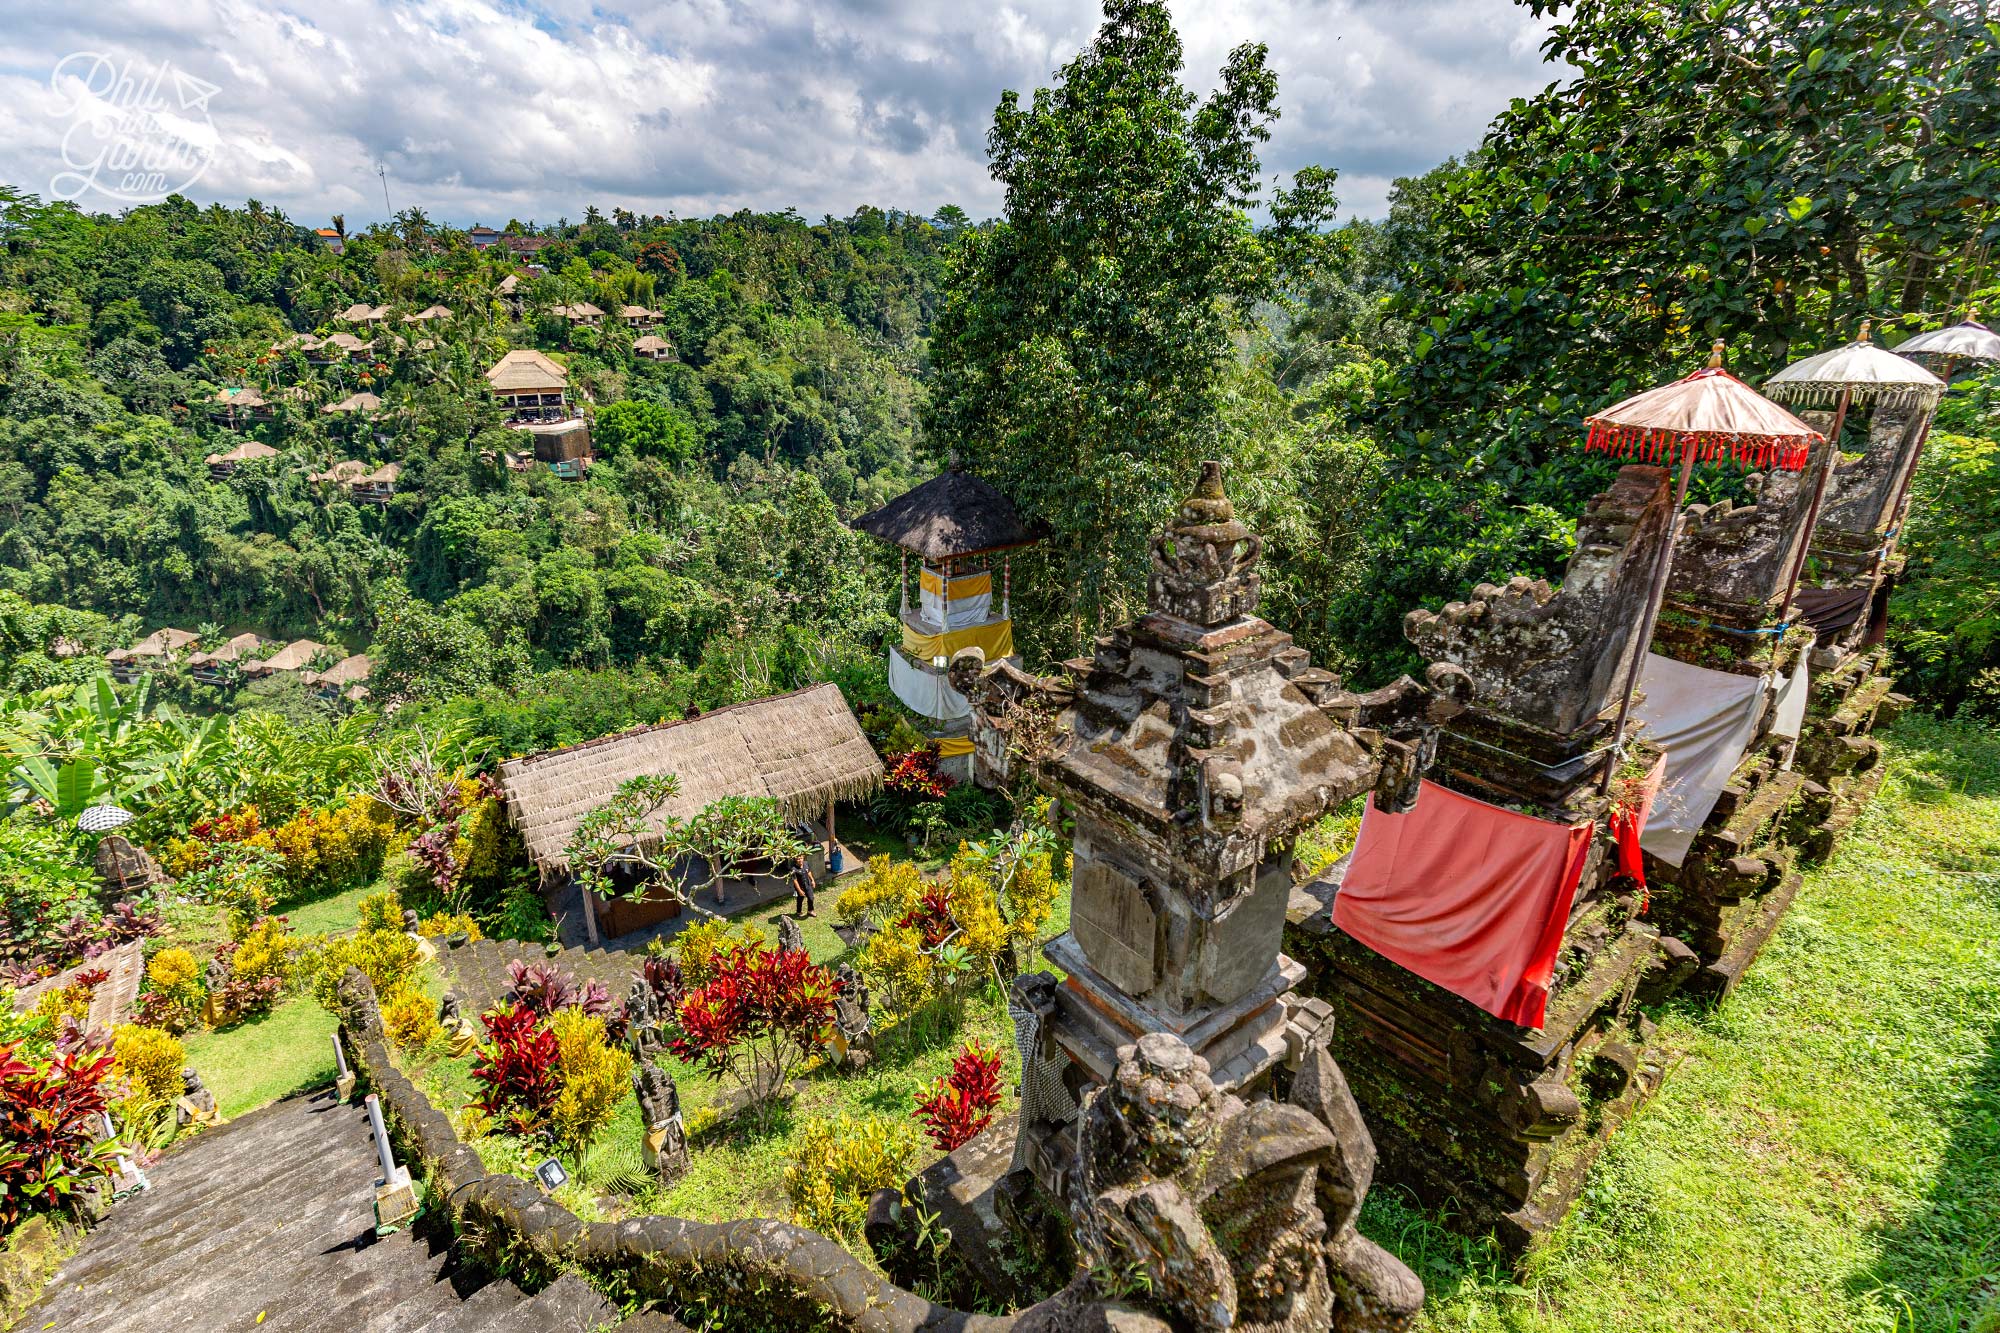 A stunning location for our cookery lesson at the Segara Madu Temple overlooking the Hanging Gardens of Bali